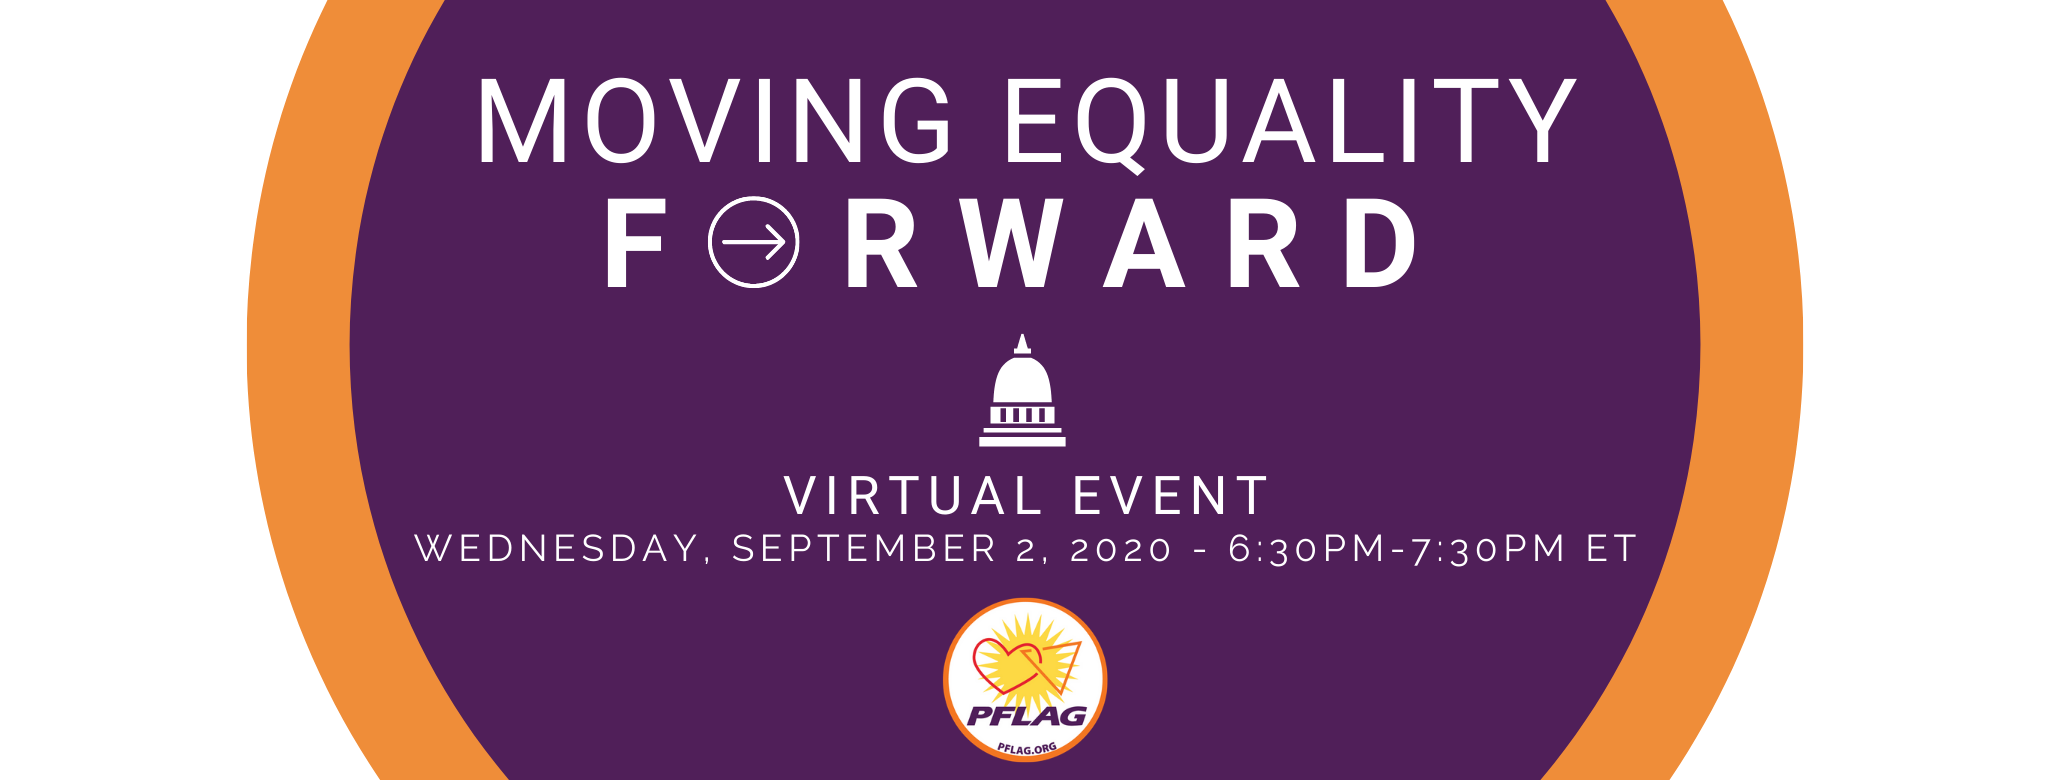 Moving Equality Forward - Virtual Event on Wednesday, September 2, 2020 from 6:30pm-7:30pm